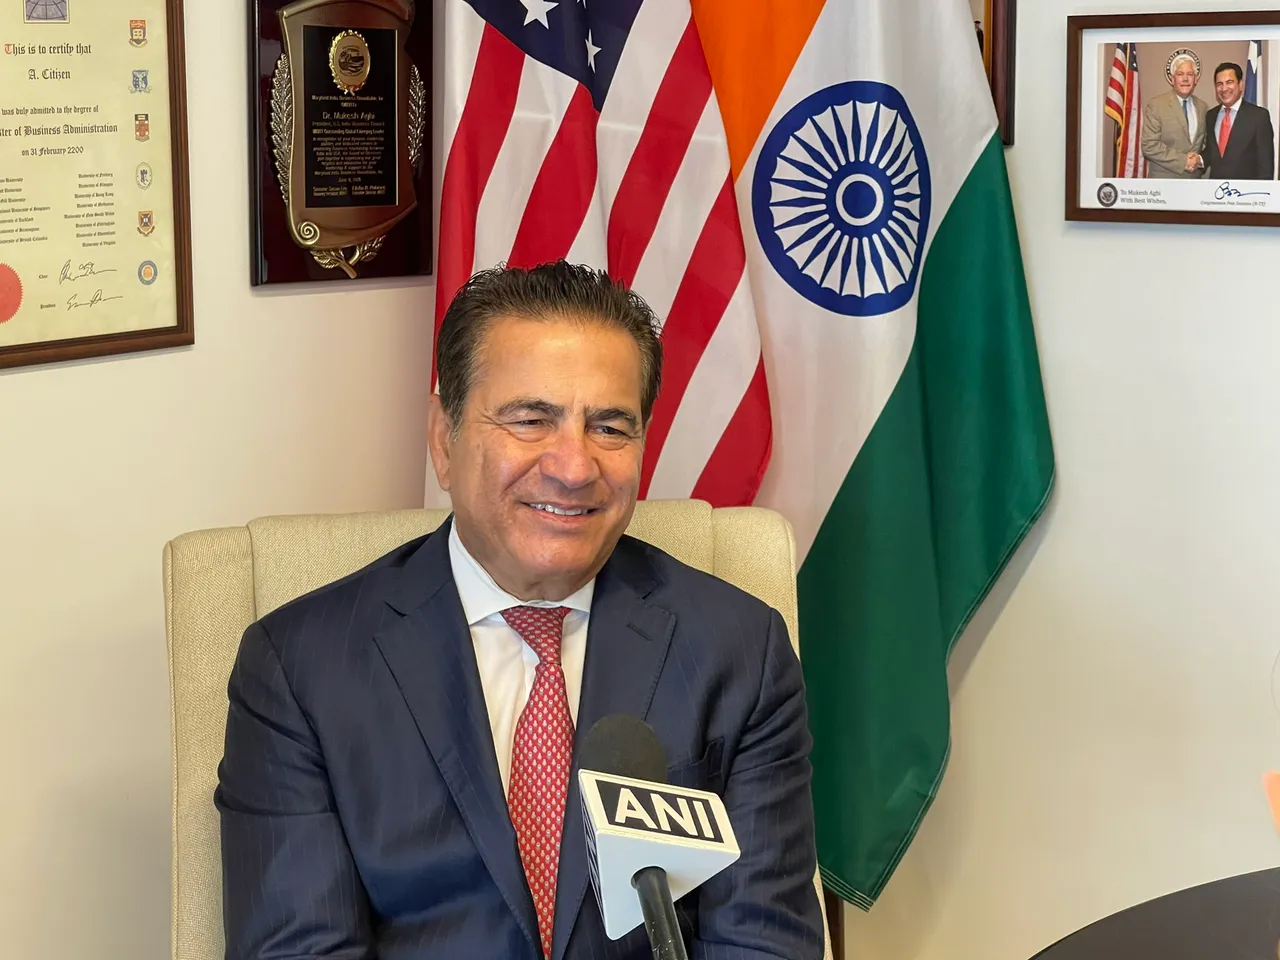 PM Modi's state visit sends message that India-US are aligned geopolitically, economically & technologically: USISPF president